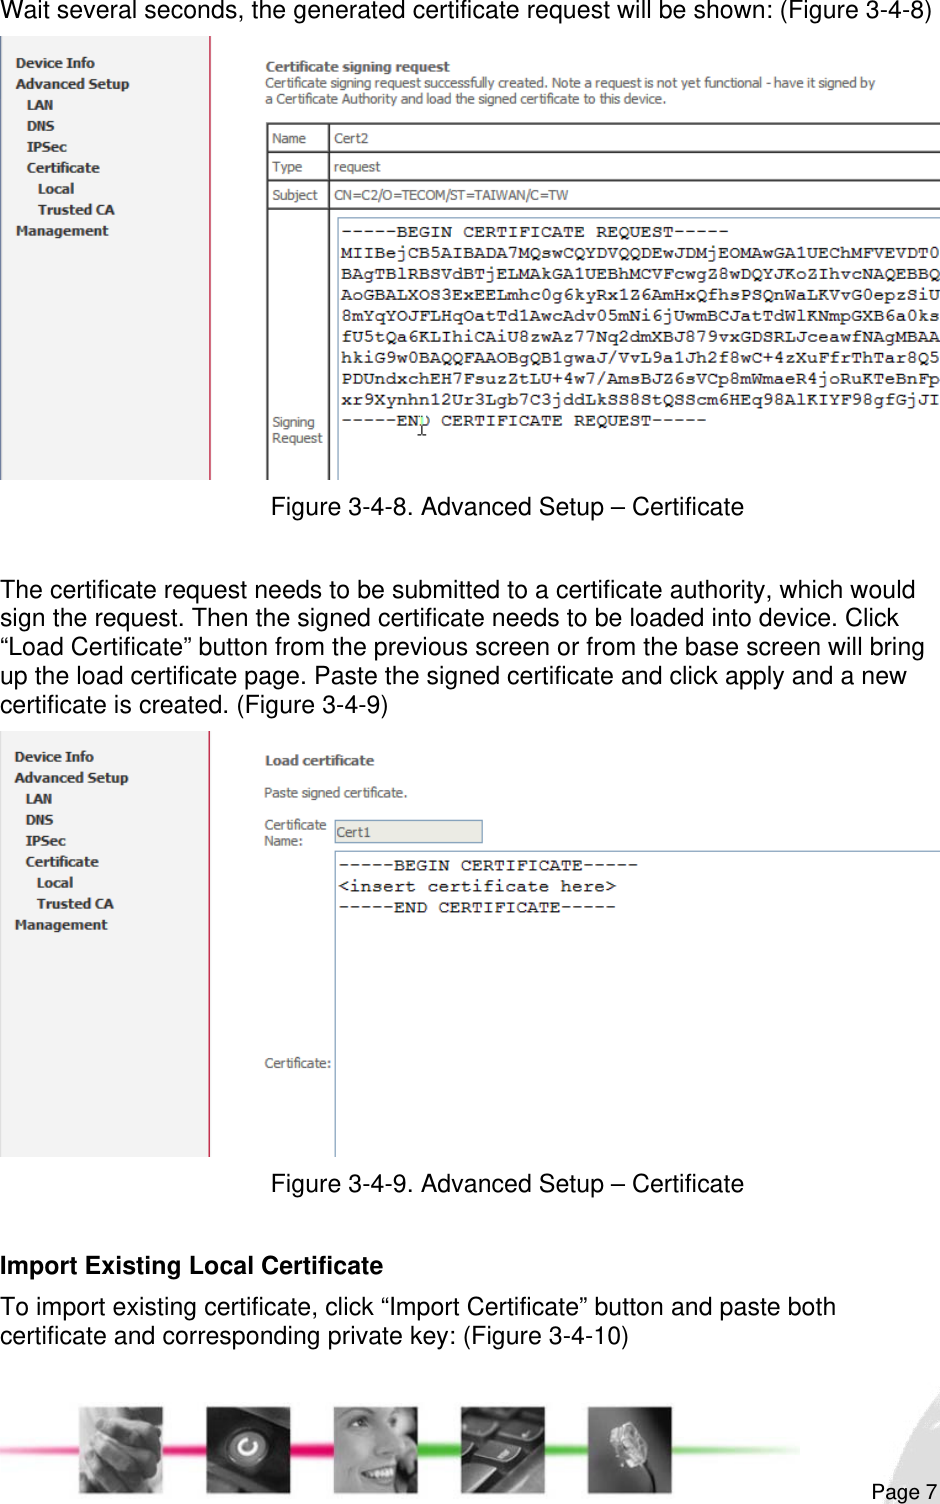                                                                                                                                                                                                       Wait several seconds, the generated certificate request will be shown: (Figure 3-4-8)  Figure 3-4-8. Advanced Setup – Certificate  The certificate request needs to be submitted to a certificate authority, which would sign the request. Then the signed certificate needs to be loaded into device. Click “Load Certificate” button from the previous screen or from the base screen will bring up the load certificate page. Paste the signed certificate and click apply and a new certificate is created. (Figure 3-4-9)  Figure 3-4-9. Advanced Setup – Certificate  Import Existing Local Certificate To import existing certificate, click “Import Certificate” button and paste both certificate and corresponding private key: (Figure 3-4-10)  Page 7 